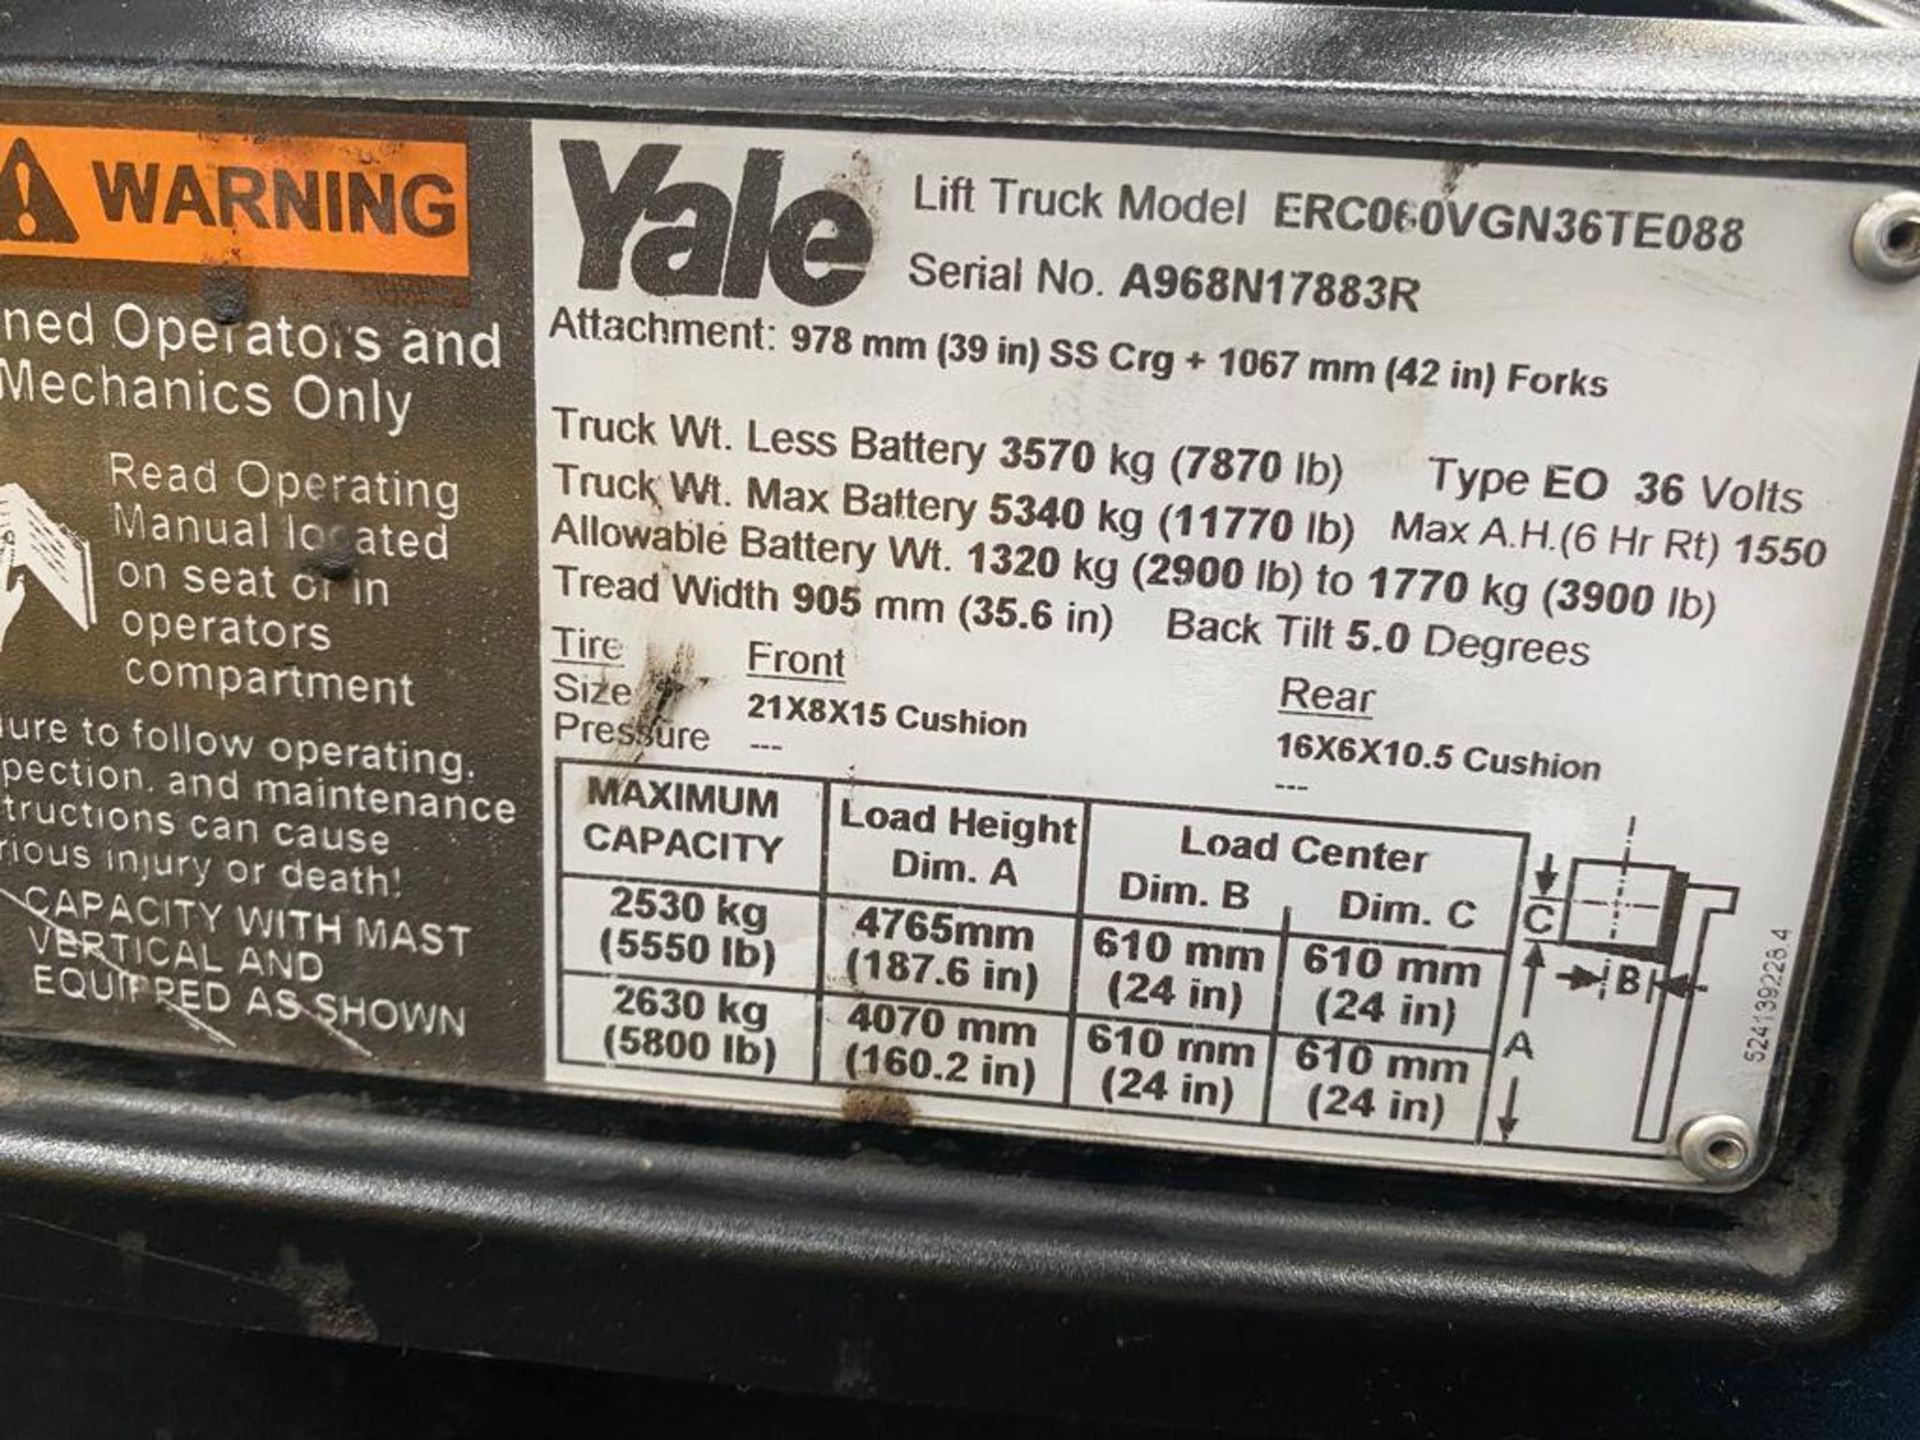 Yale electric Forklift, model ERC060VGN36TE088, capacity 5800 lb - Image 29 of 41